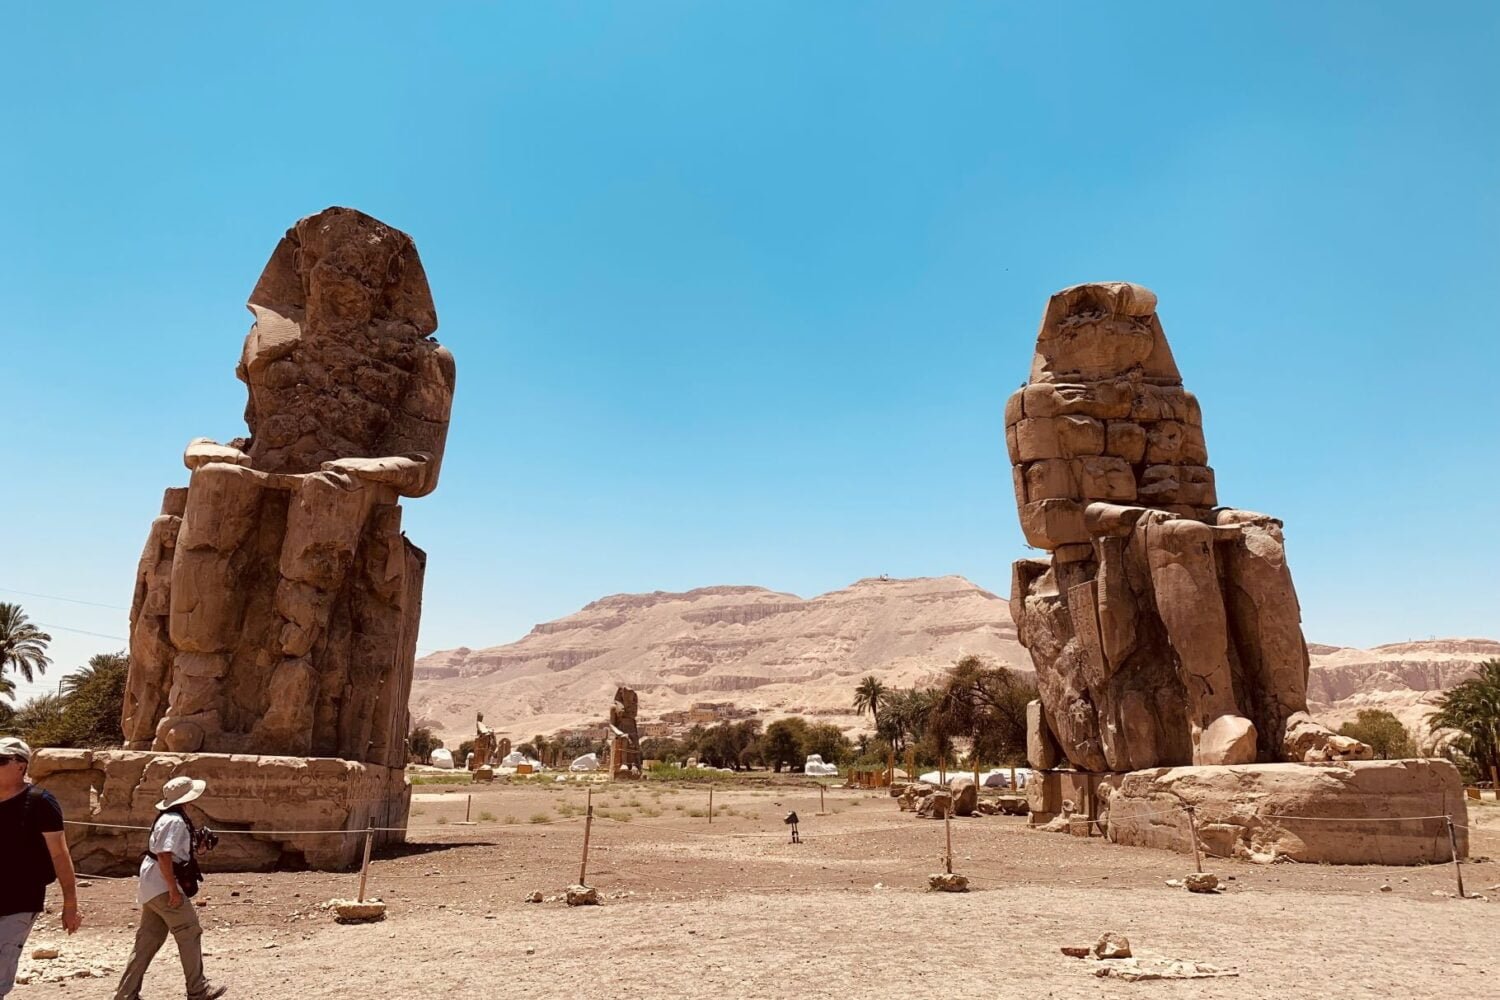 Egypt Budget Tour With Nile Cruise In 15 Days